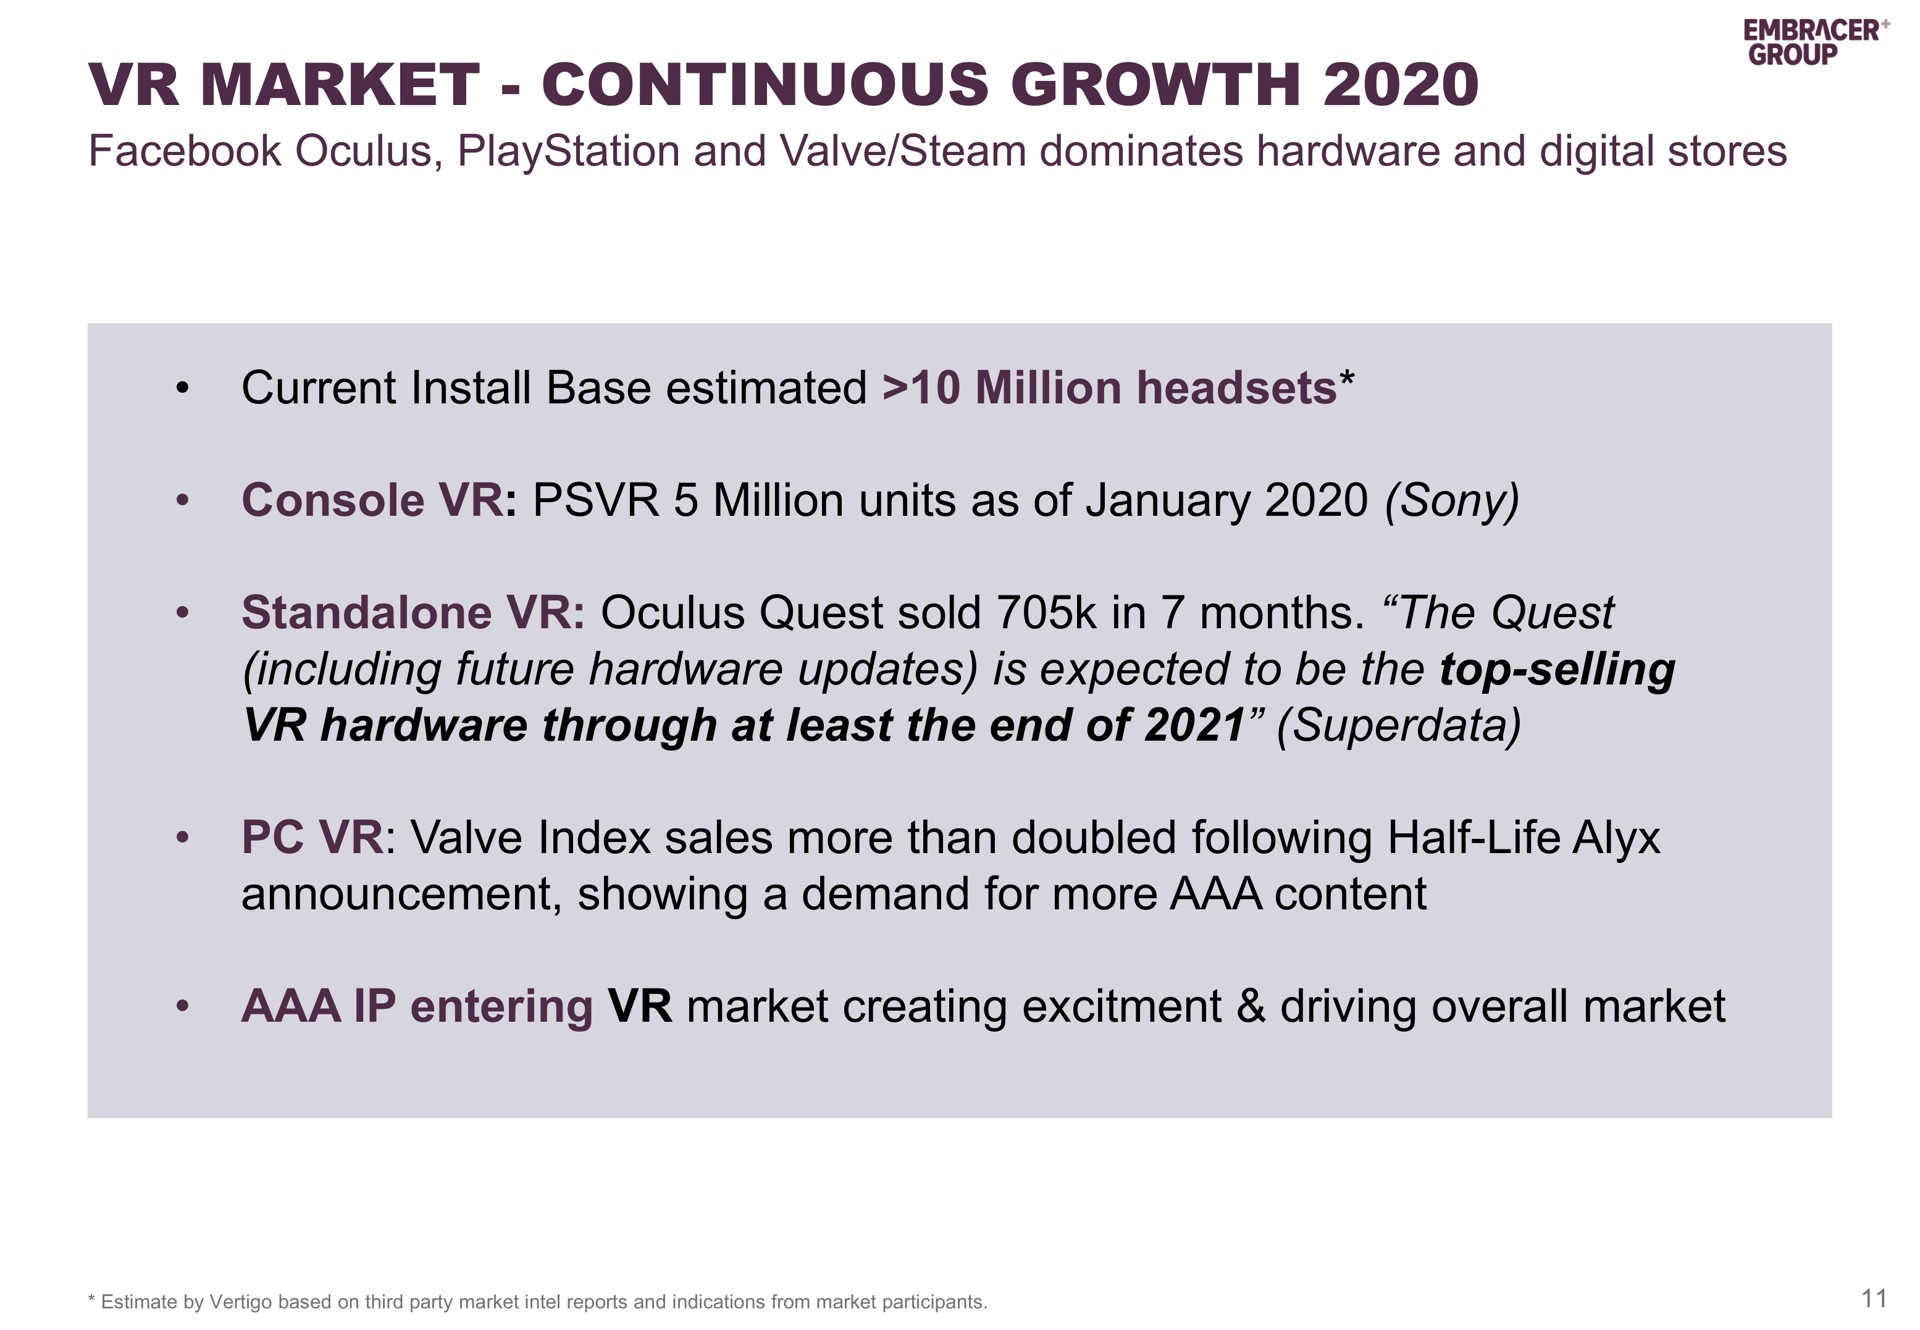 market continuous growth current install base estimated million headsets console million units as of oculus quest sold in months the quest including future hardware updates is expected to be the top selling hardware through at least the end of valve index sales more than doubled following half life announcement showing a demand for more content entering market creating driving overall market | Embracer Group